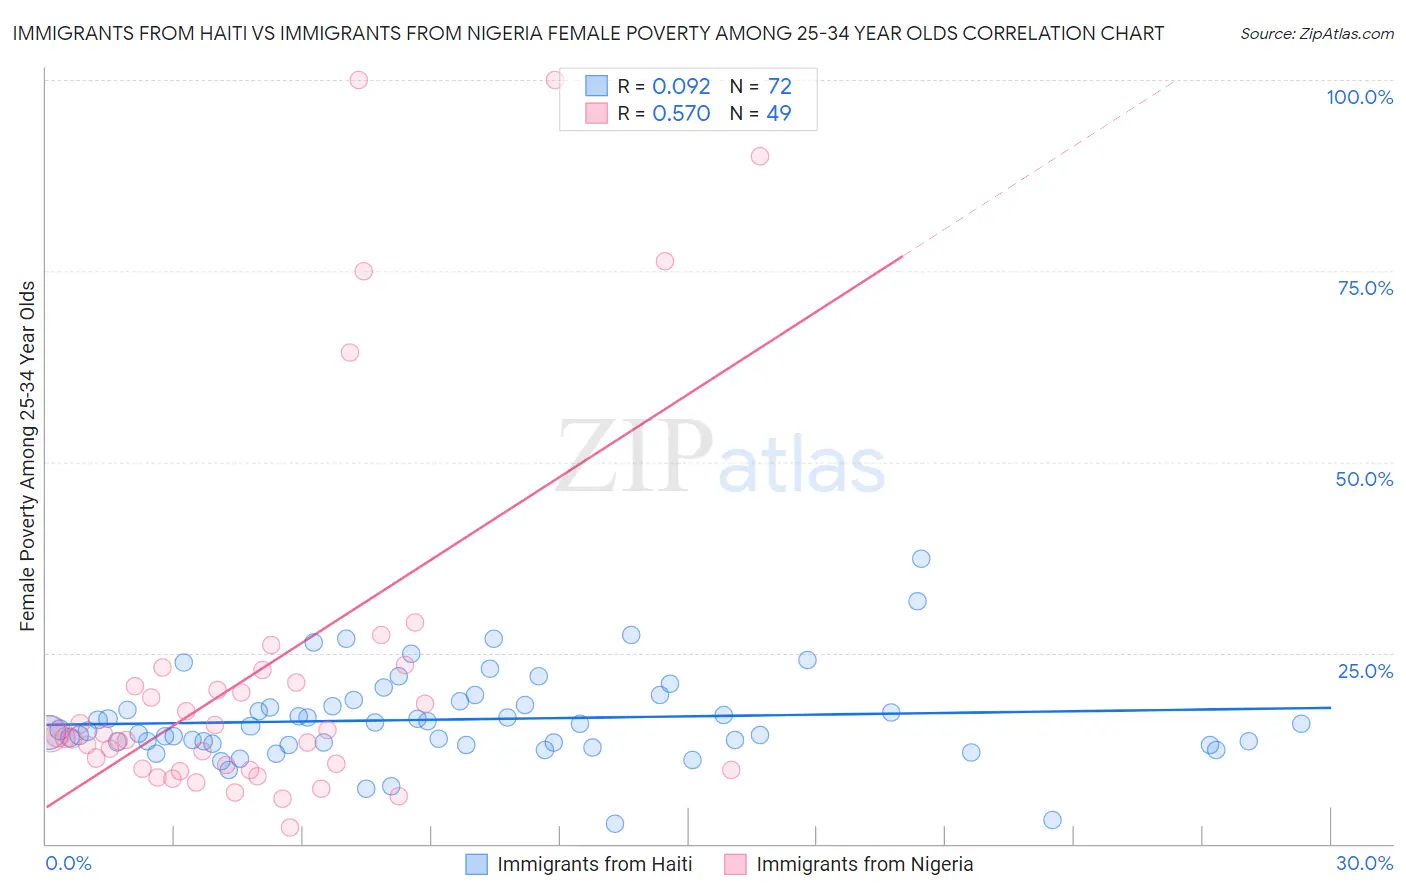 Immigrants from Haiti vs Immigrants from Nigeria Female Poverty Among 25-34 Year Olds